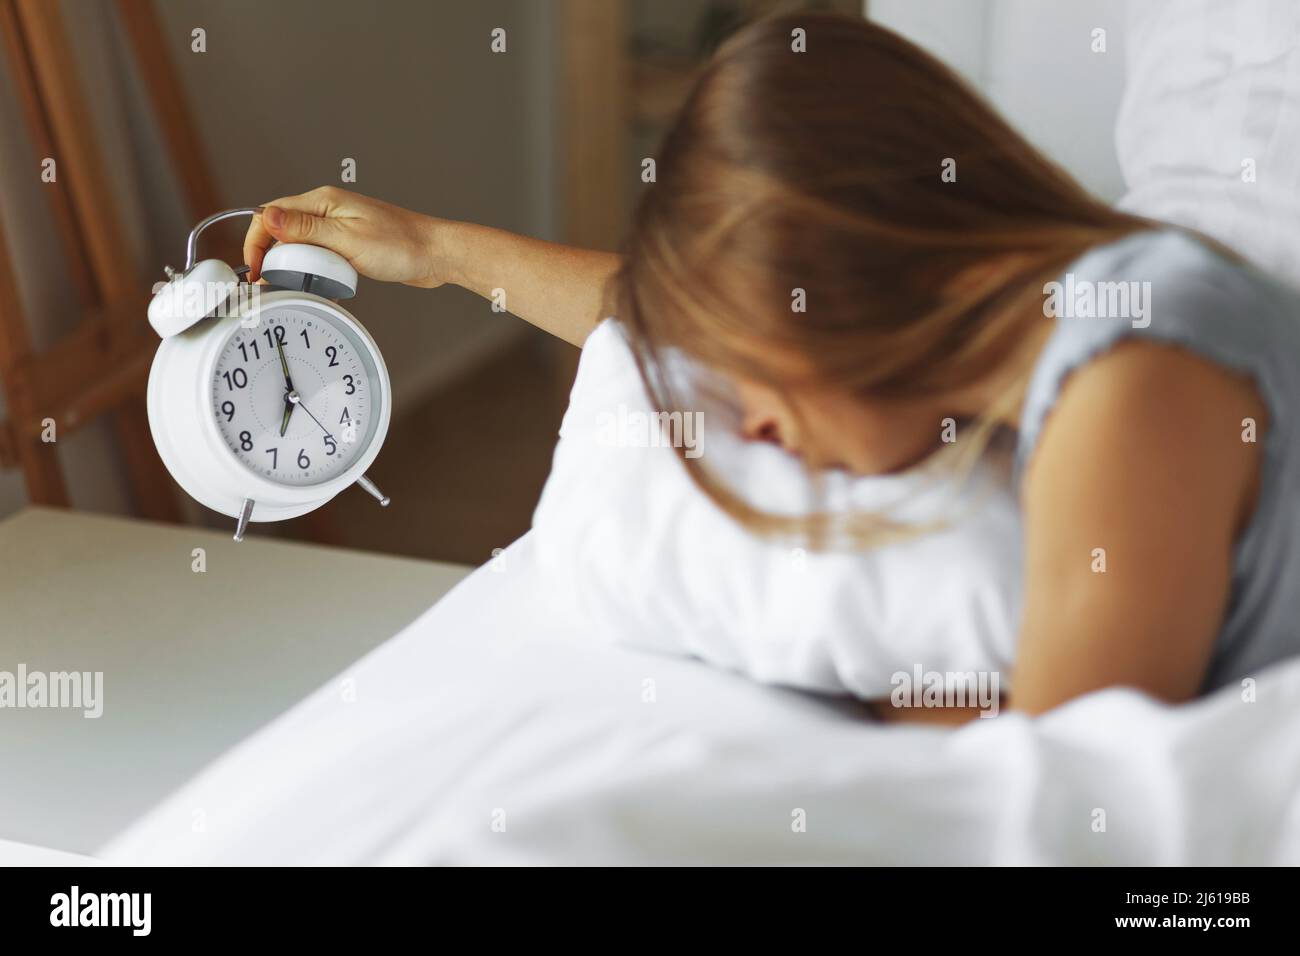 Woman sleep on the bed turns off the alarm clock wake up at the morning, Selective focus.Young woman reaching to turn off alarm clock ,early morning Stock Photo